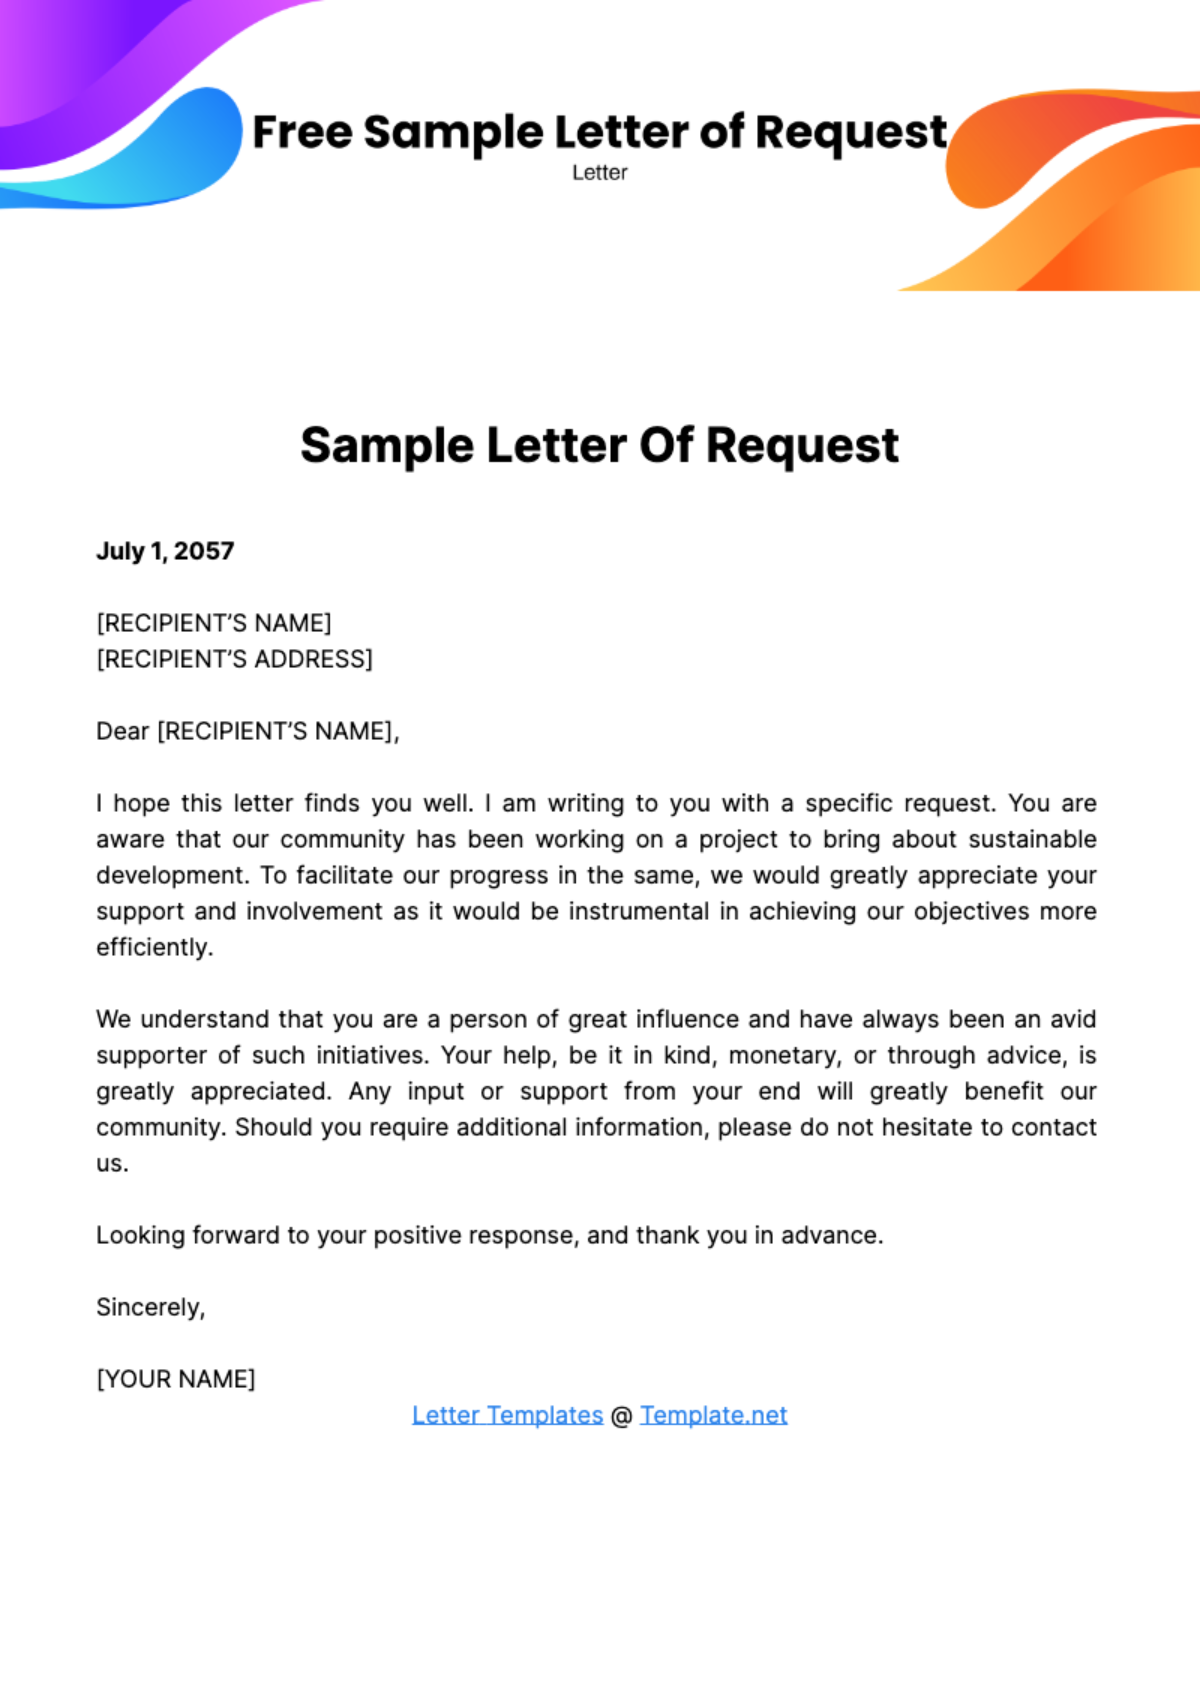 Sample Letter of Request Template